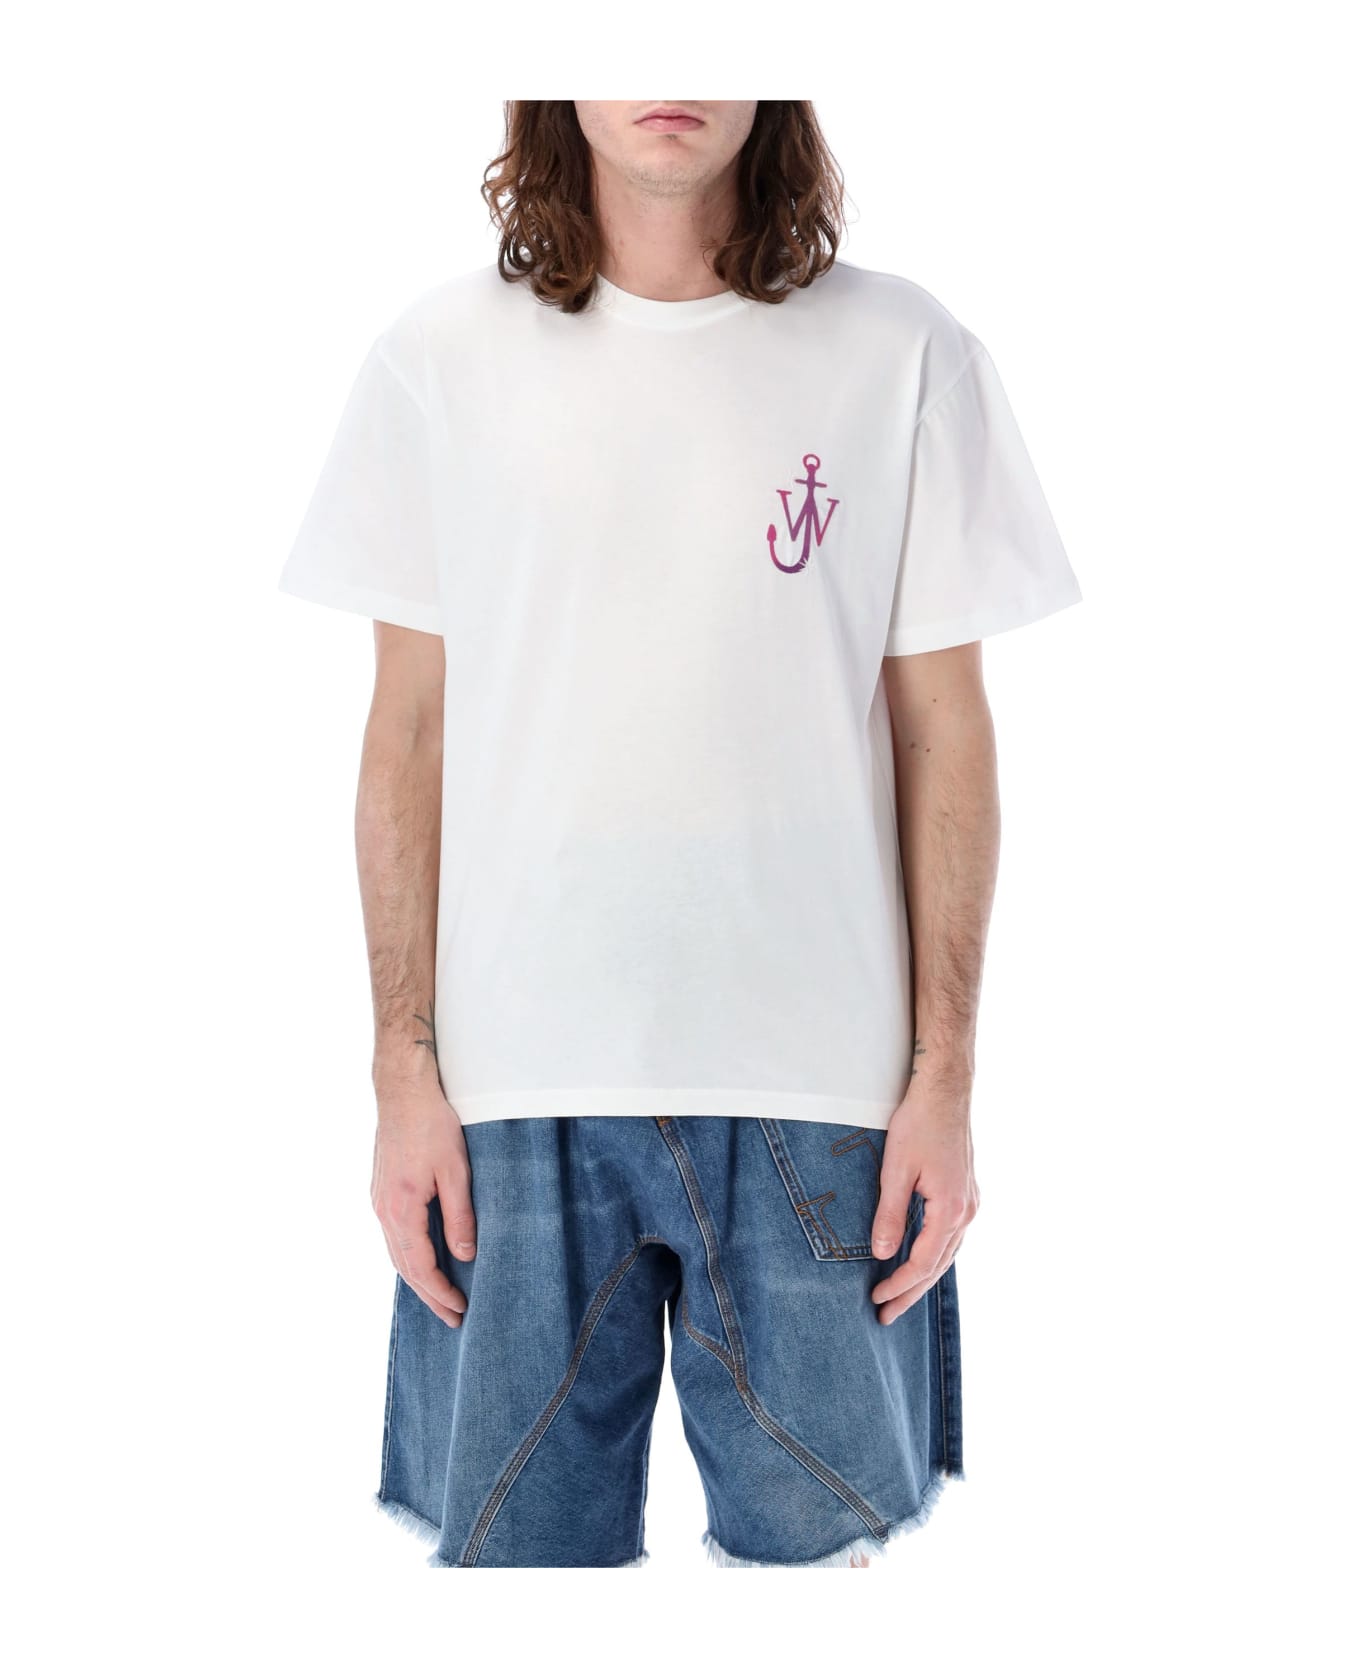 J.W. Anderson "naturally Sweet" T-shirt - WHITE シャツ